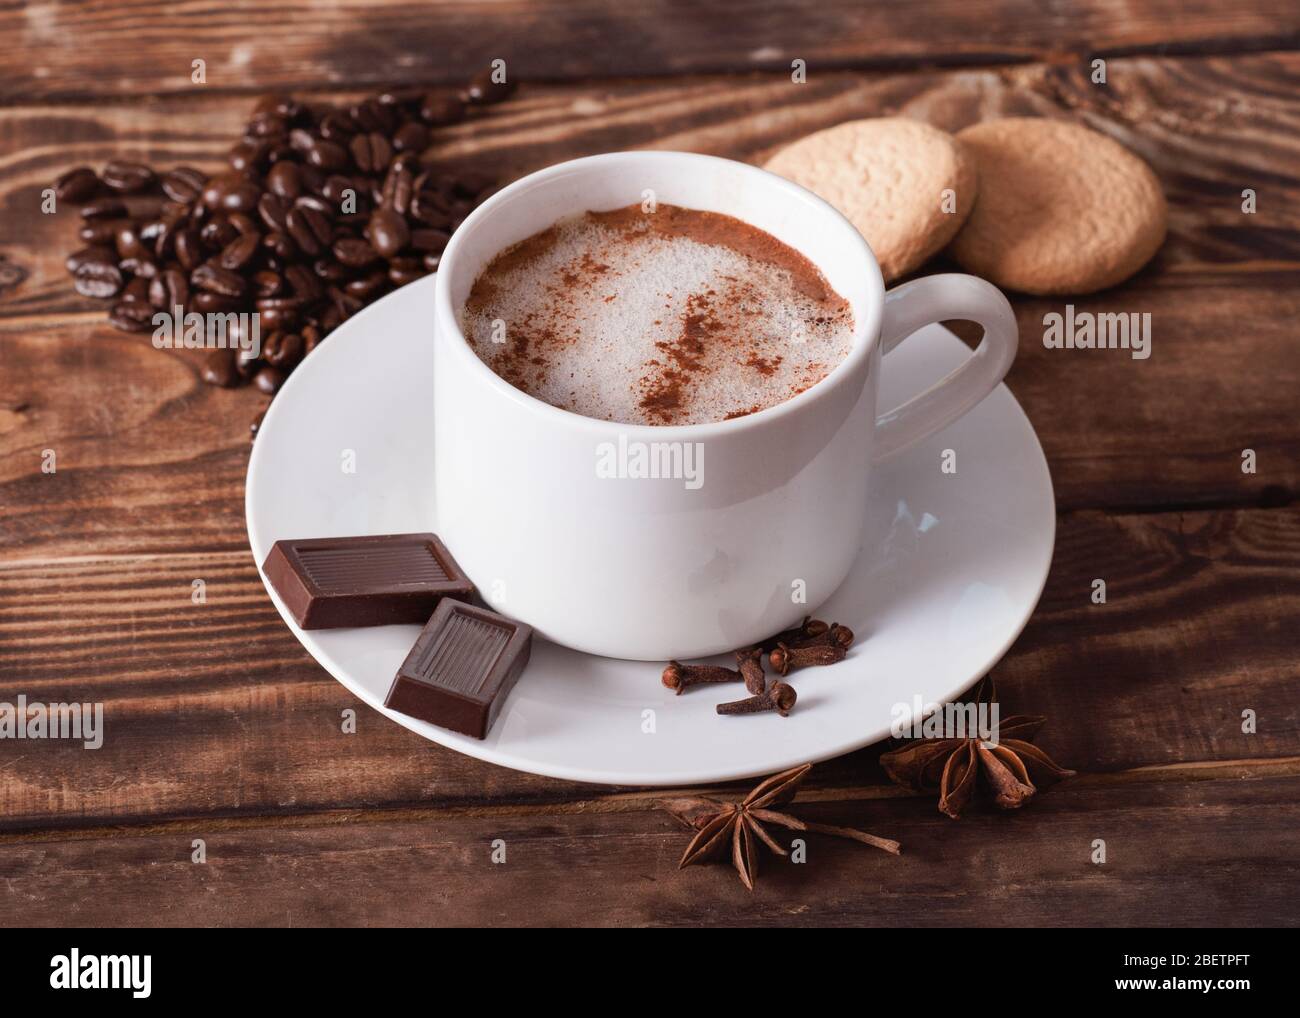 a cap of coffee with foam, cakes,  heart-shaped coffee beans on the wooden table.  Flat Lay with no people Stock Photo